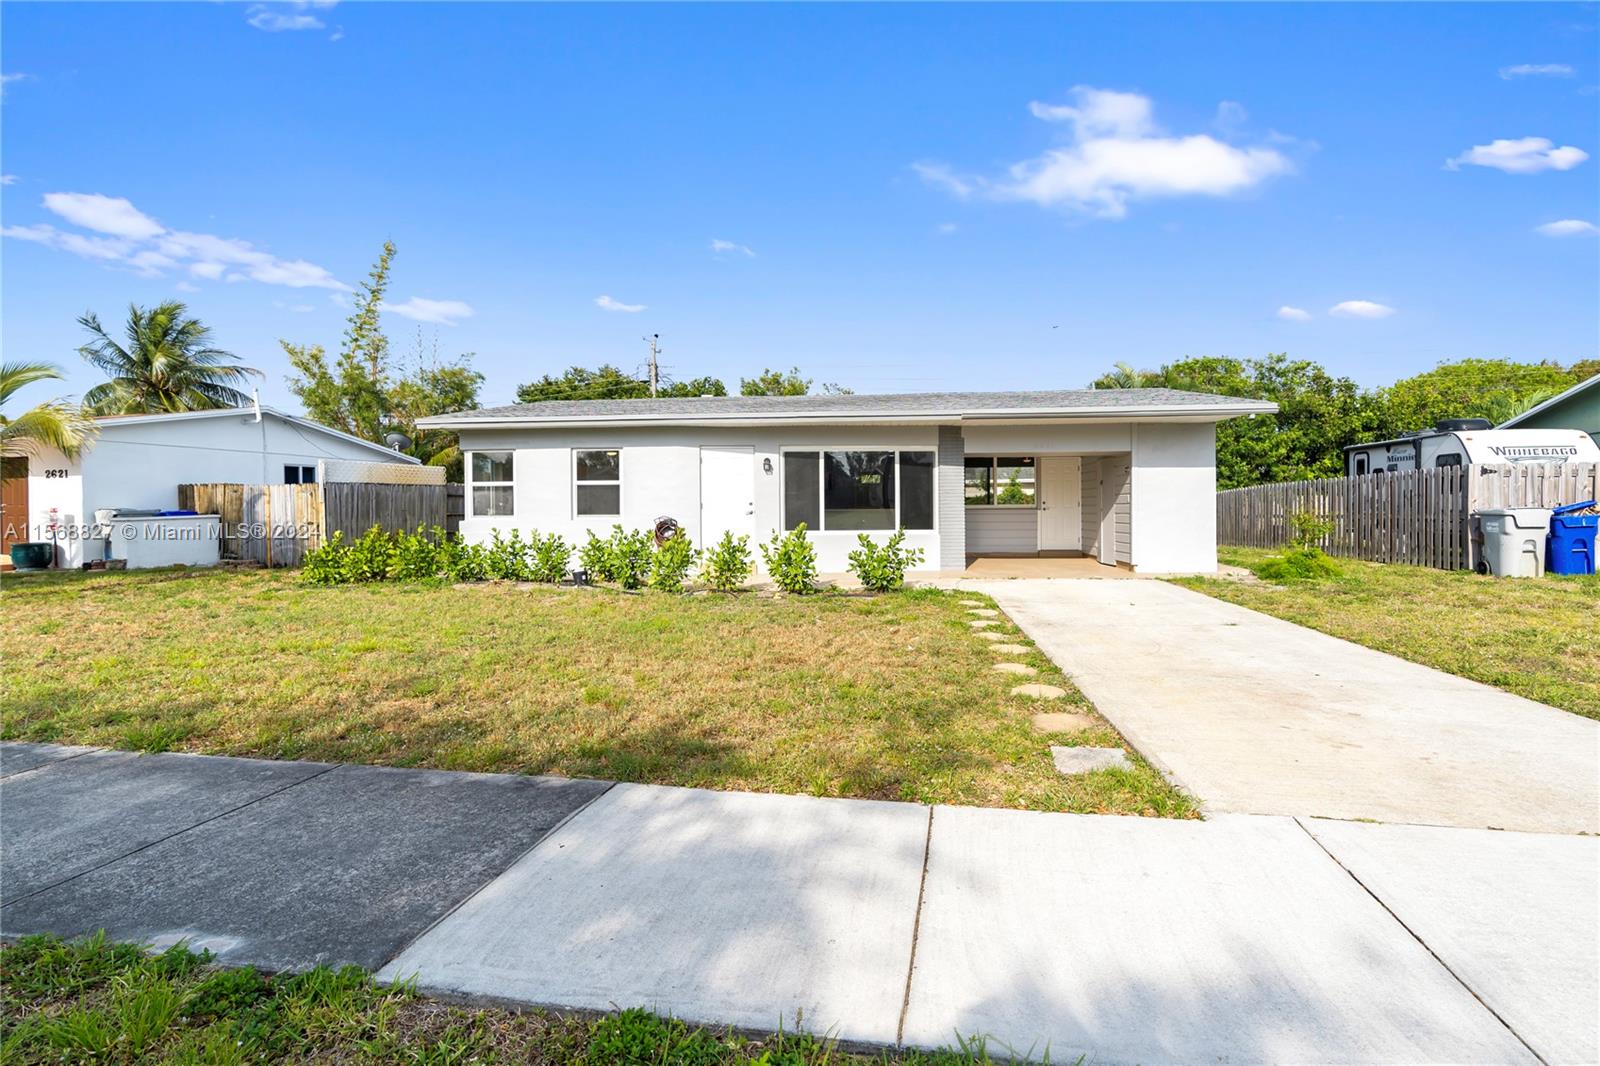 2631 NE 9th Ter, Pompano Beach, Florida 33064, 3 Bedrooms Bedrooms, ,1 BathroomBathrooms,Residential,For Sale,2631 NE 9th Ter,A11568827